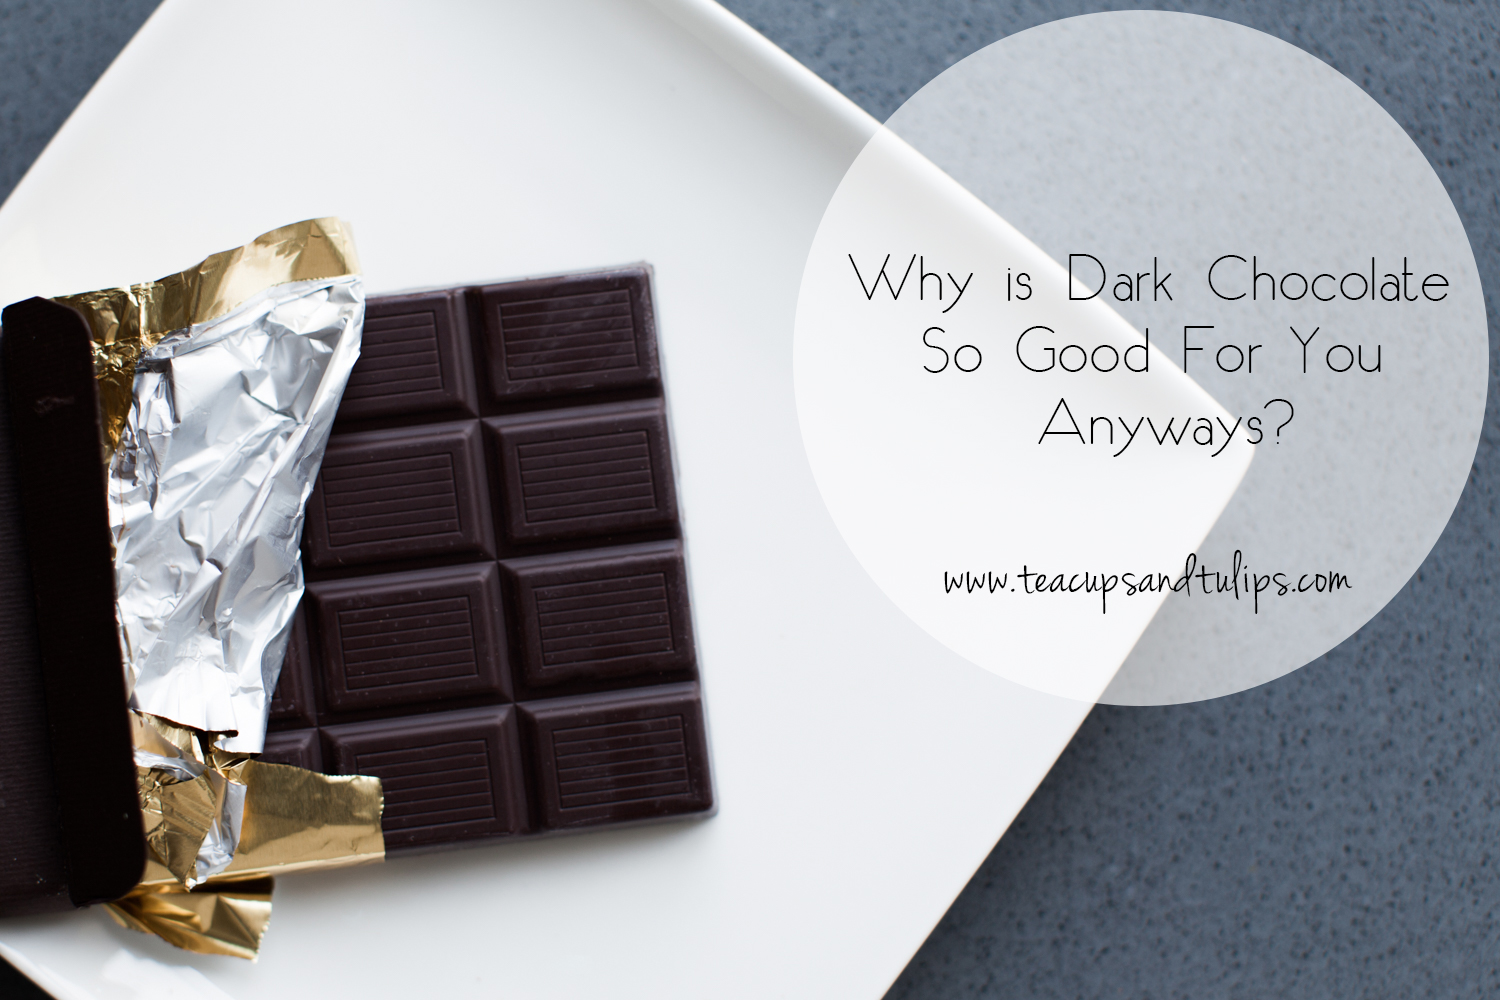 Why is Dark Chocolate So Good For You Anyways?